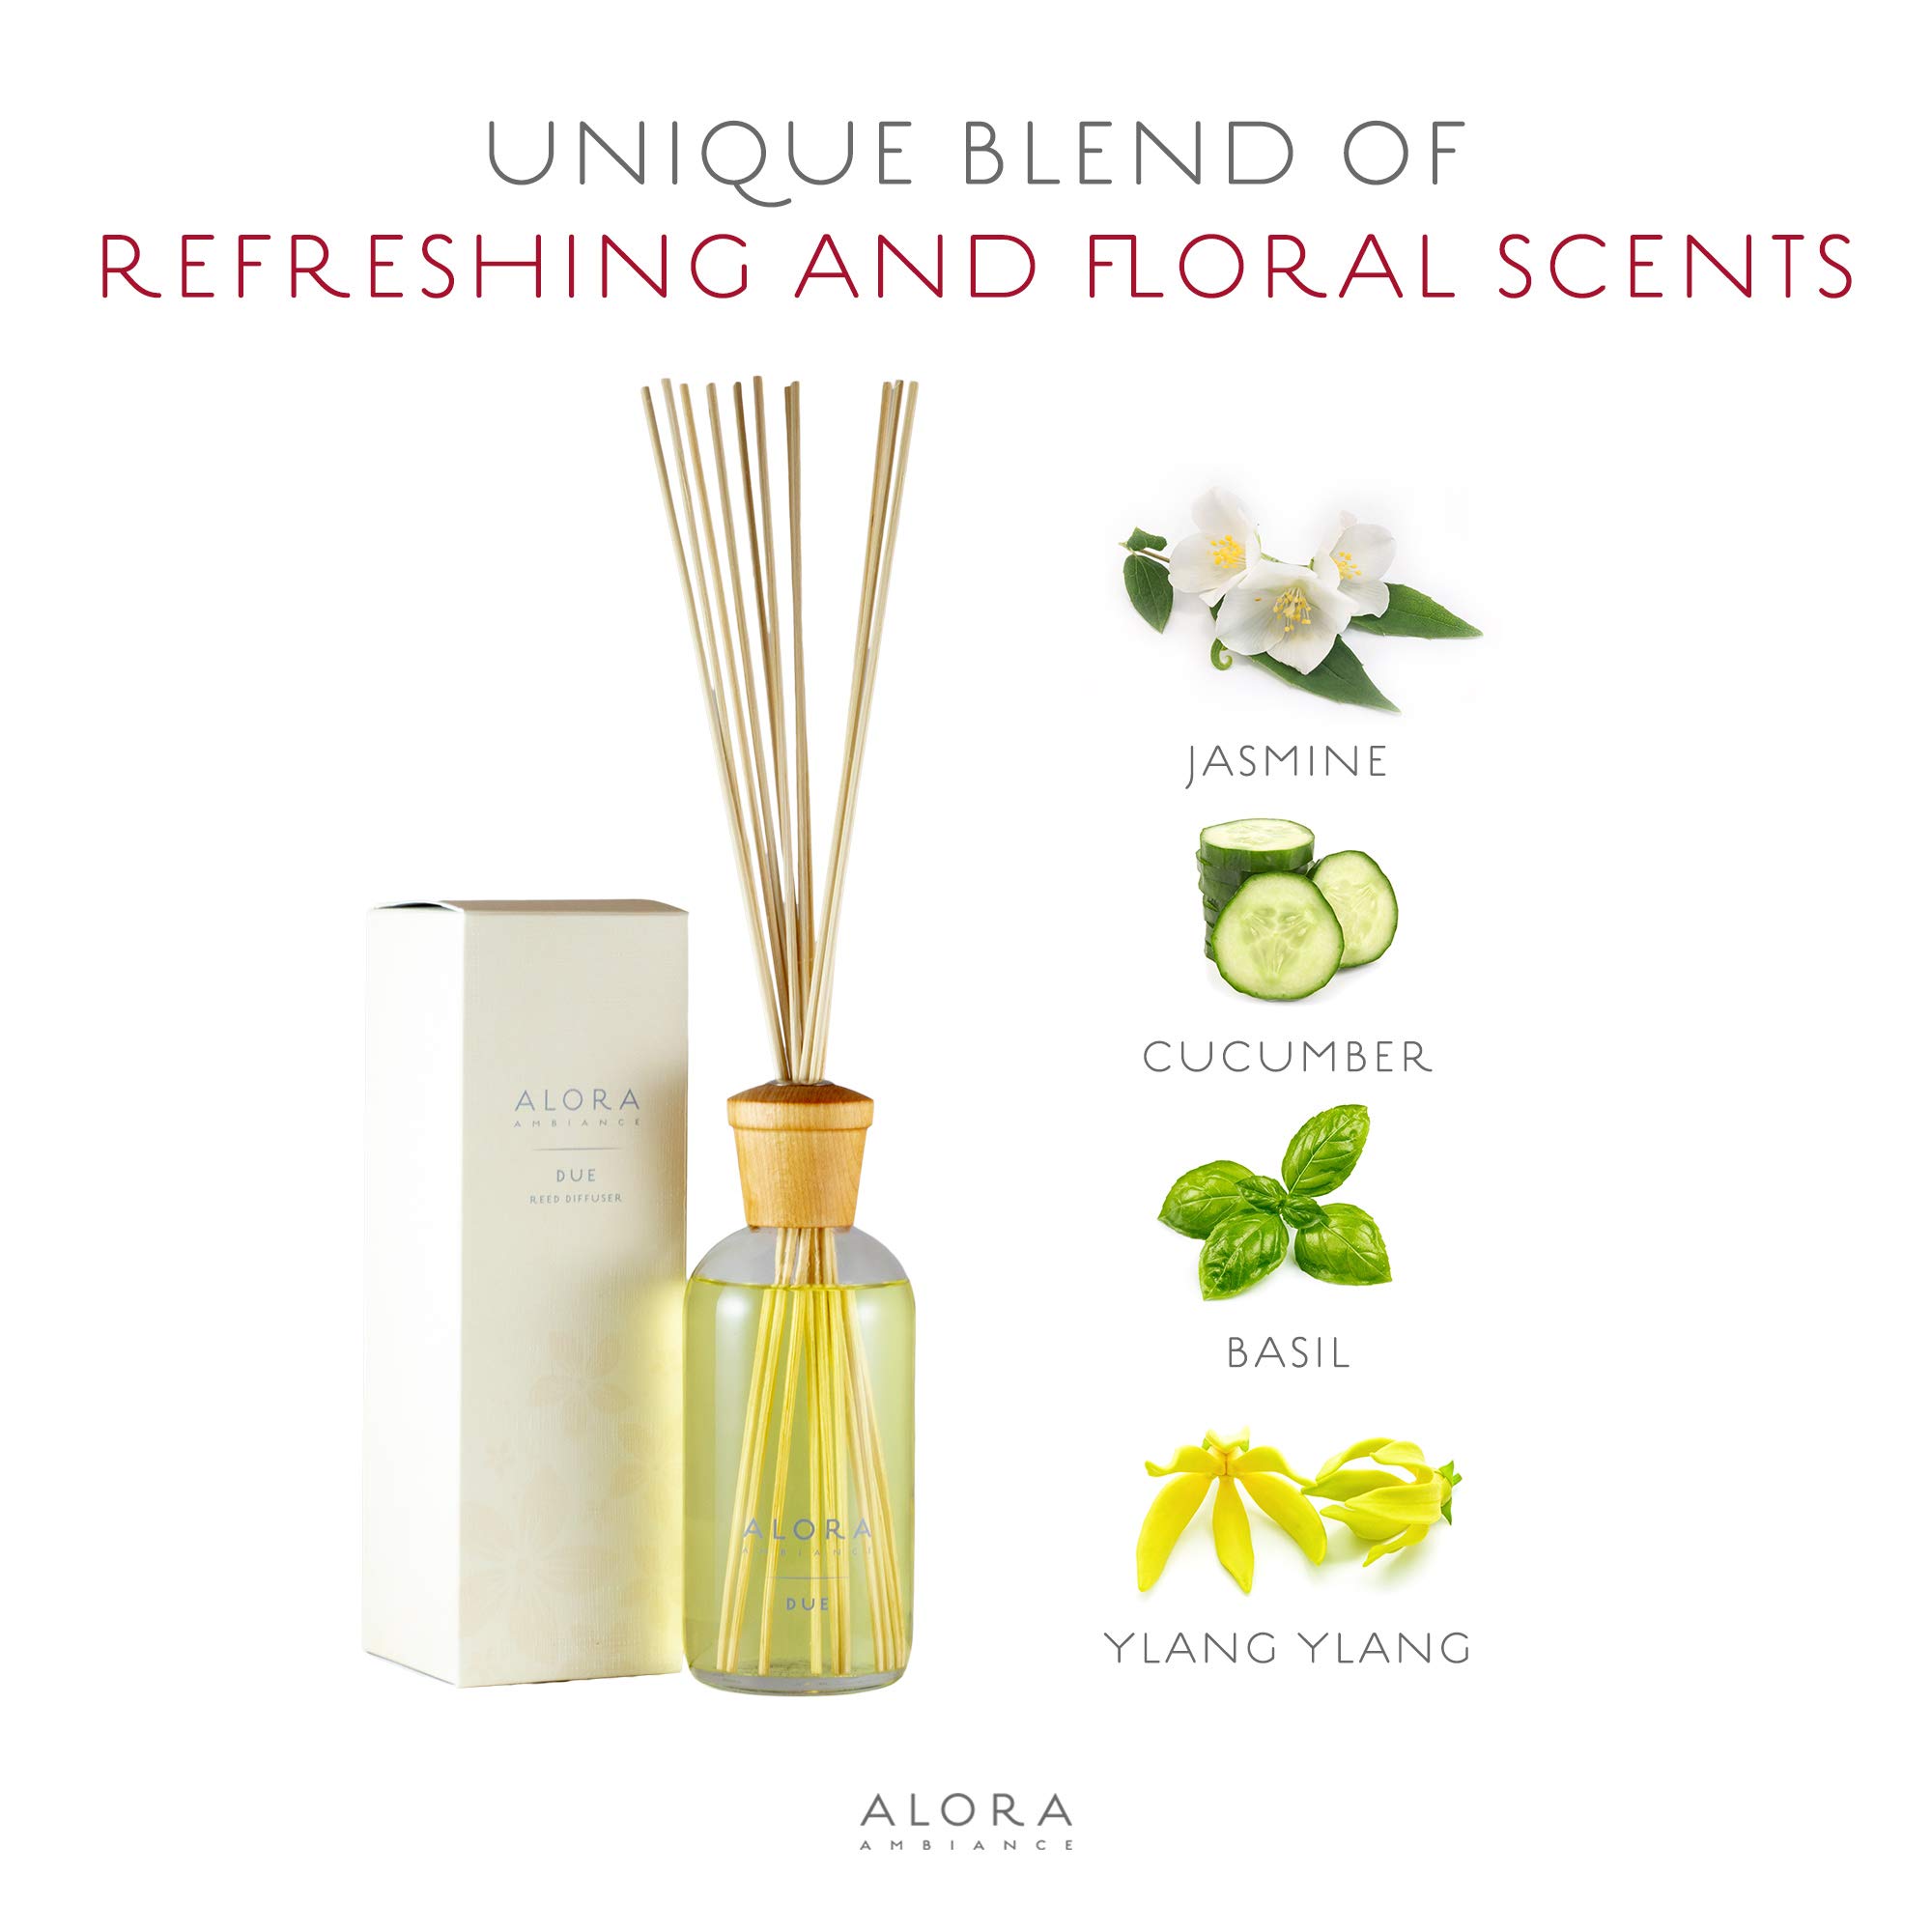 Due Reed Diffuser 16oz diffuser by Alora Ambiance